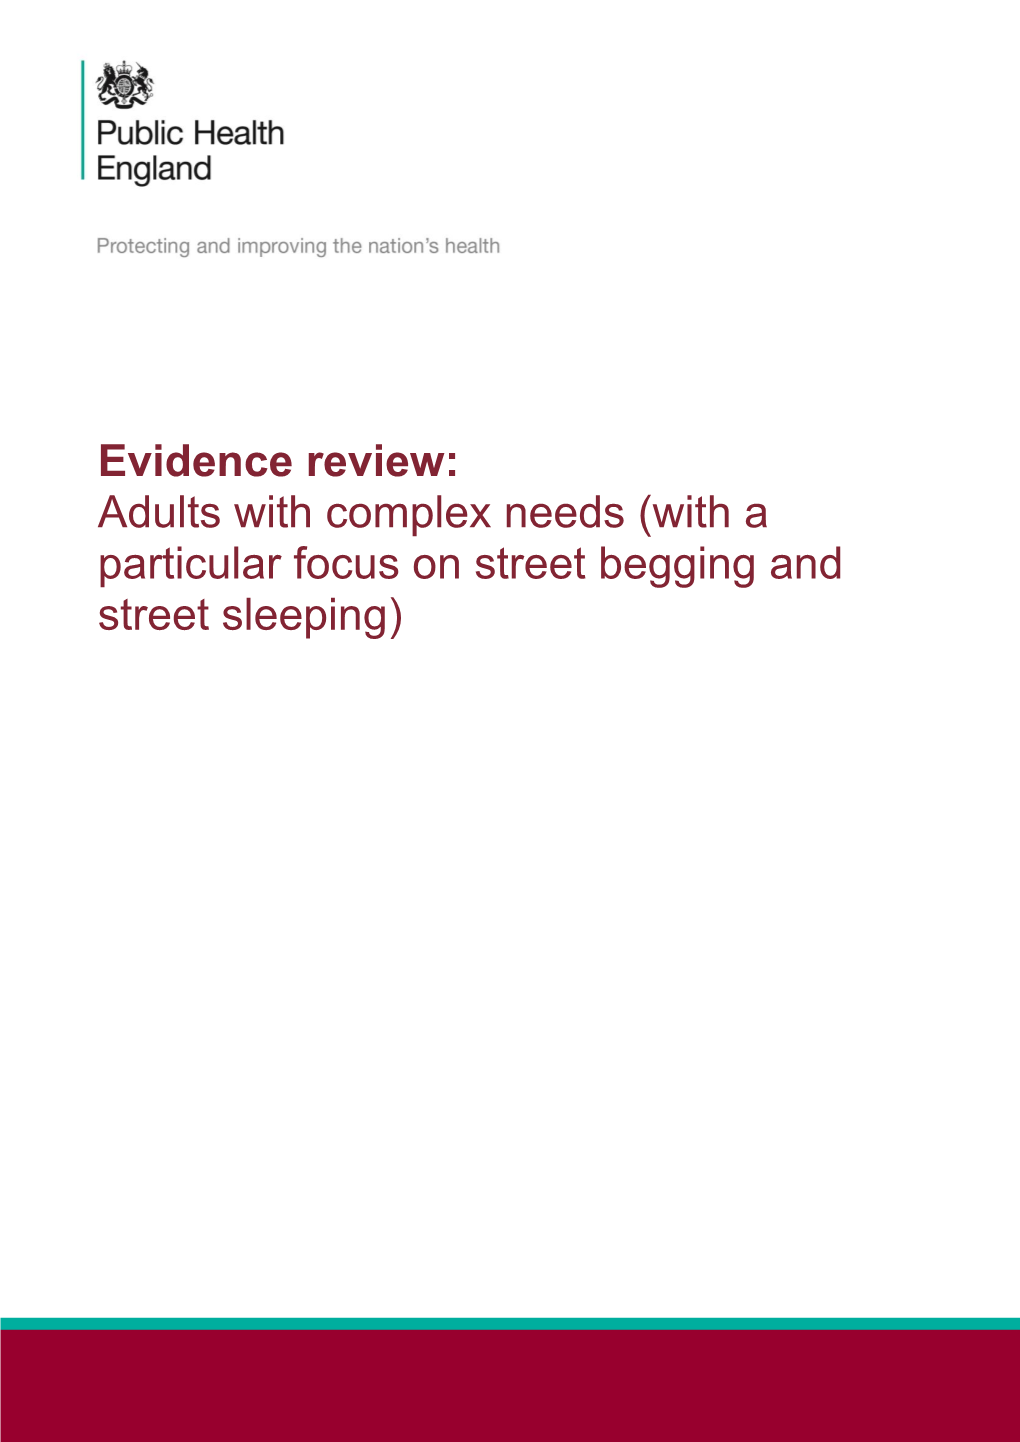 Adults with Complex Needs Who Are Homeless: Evidence Review